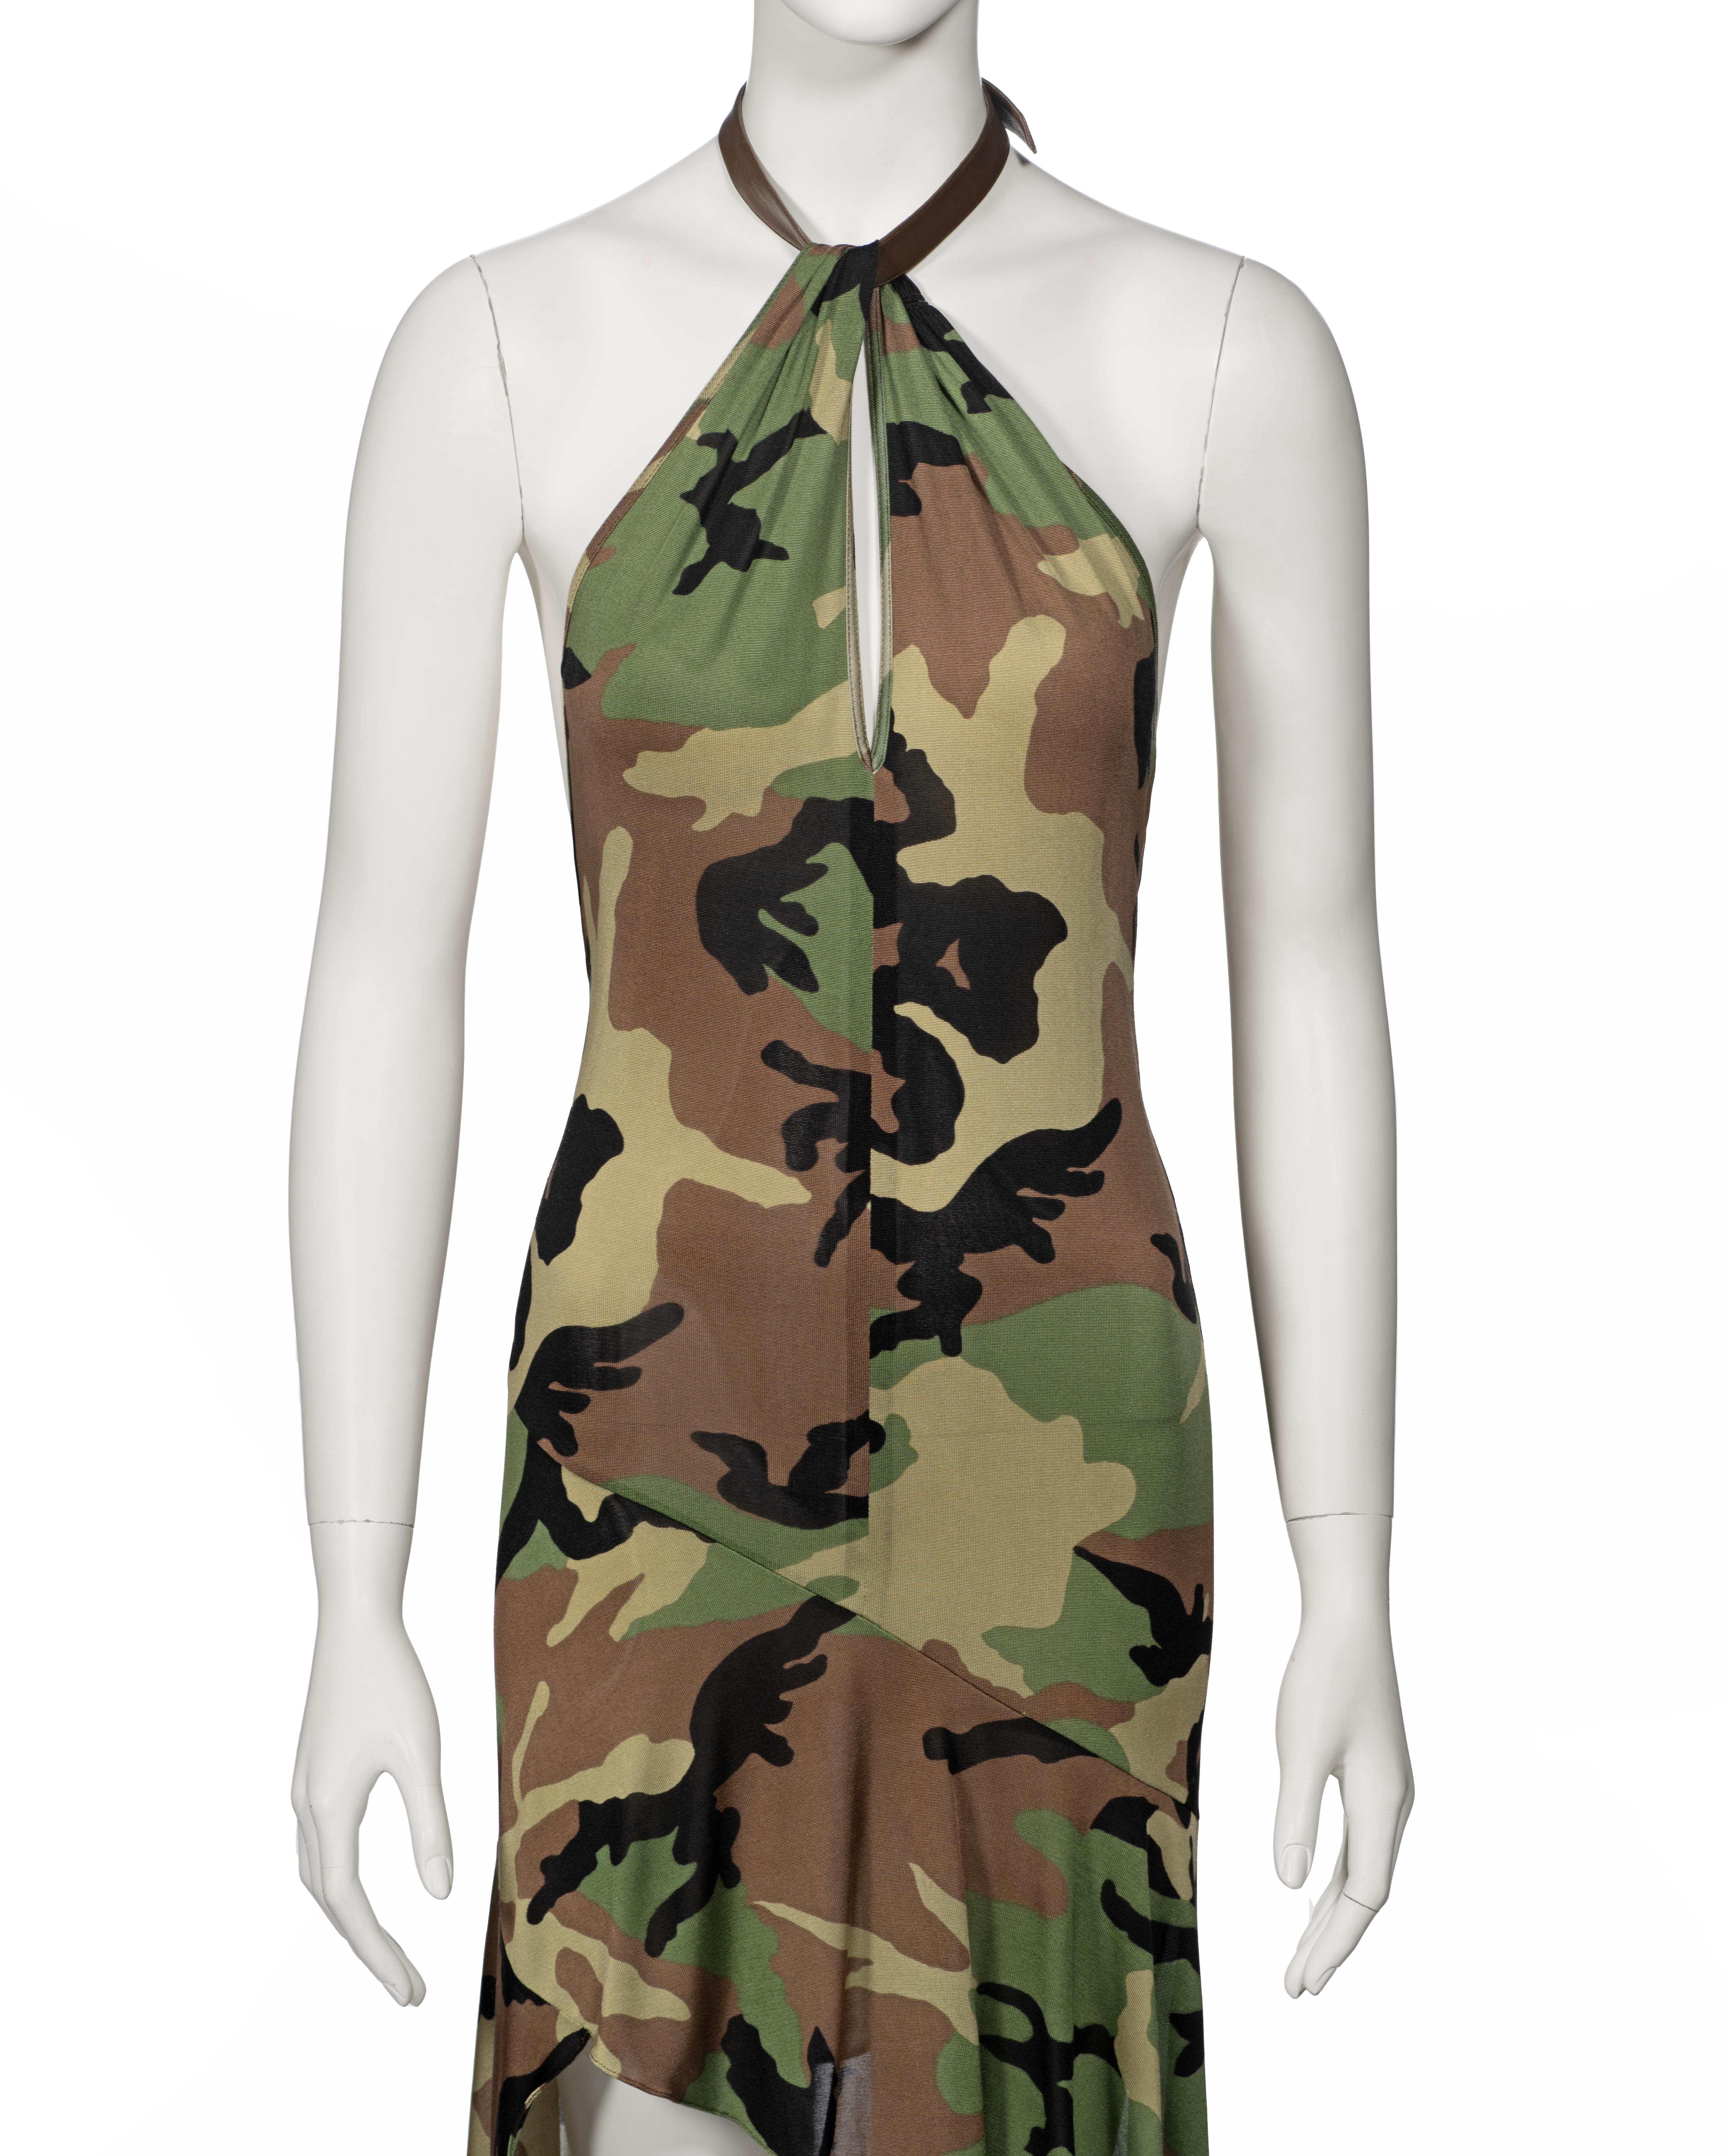 Christian Dior by John Galliano Cameo Print Silk Jersey Halter Dress, ss 2001 In Excellent Condition For Sale In London, GB